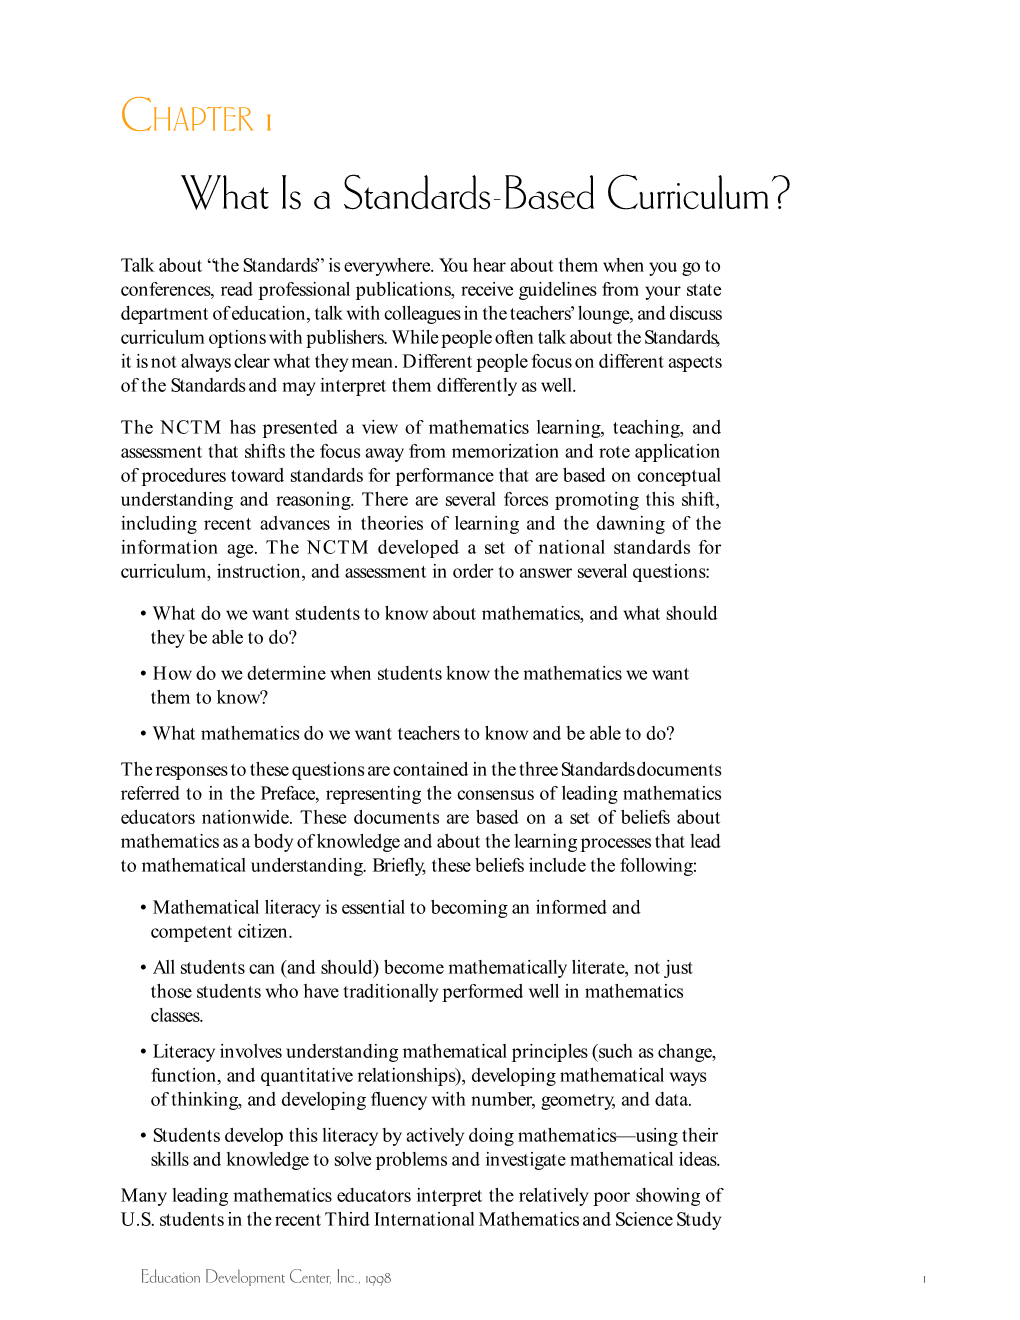 CHAPTER 1 What Is a Standards-Based Curriculum?